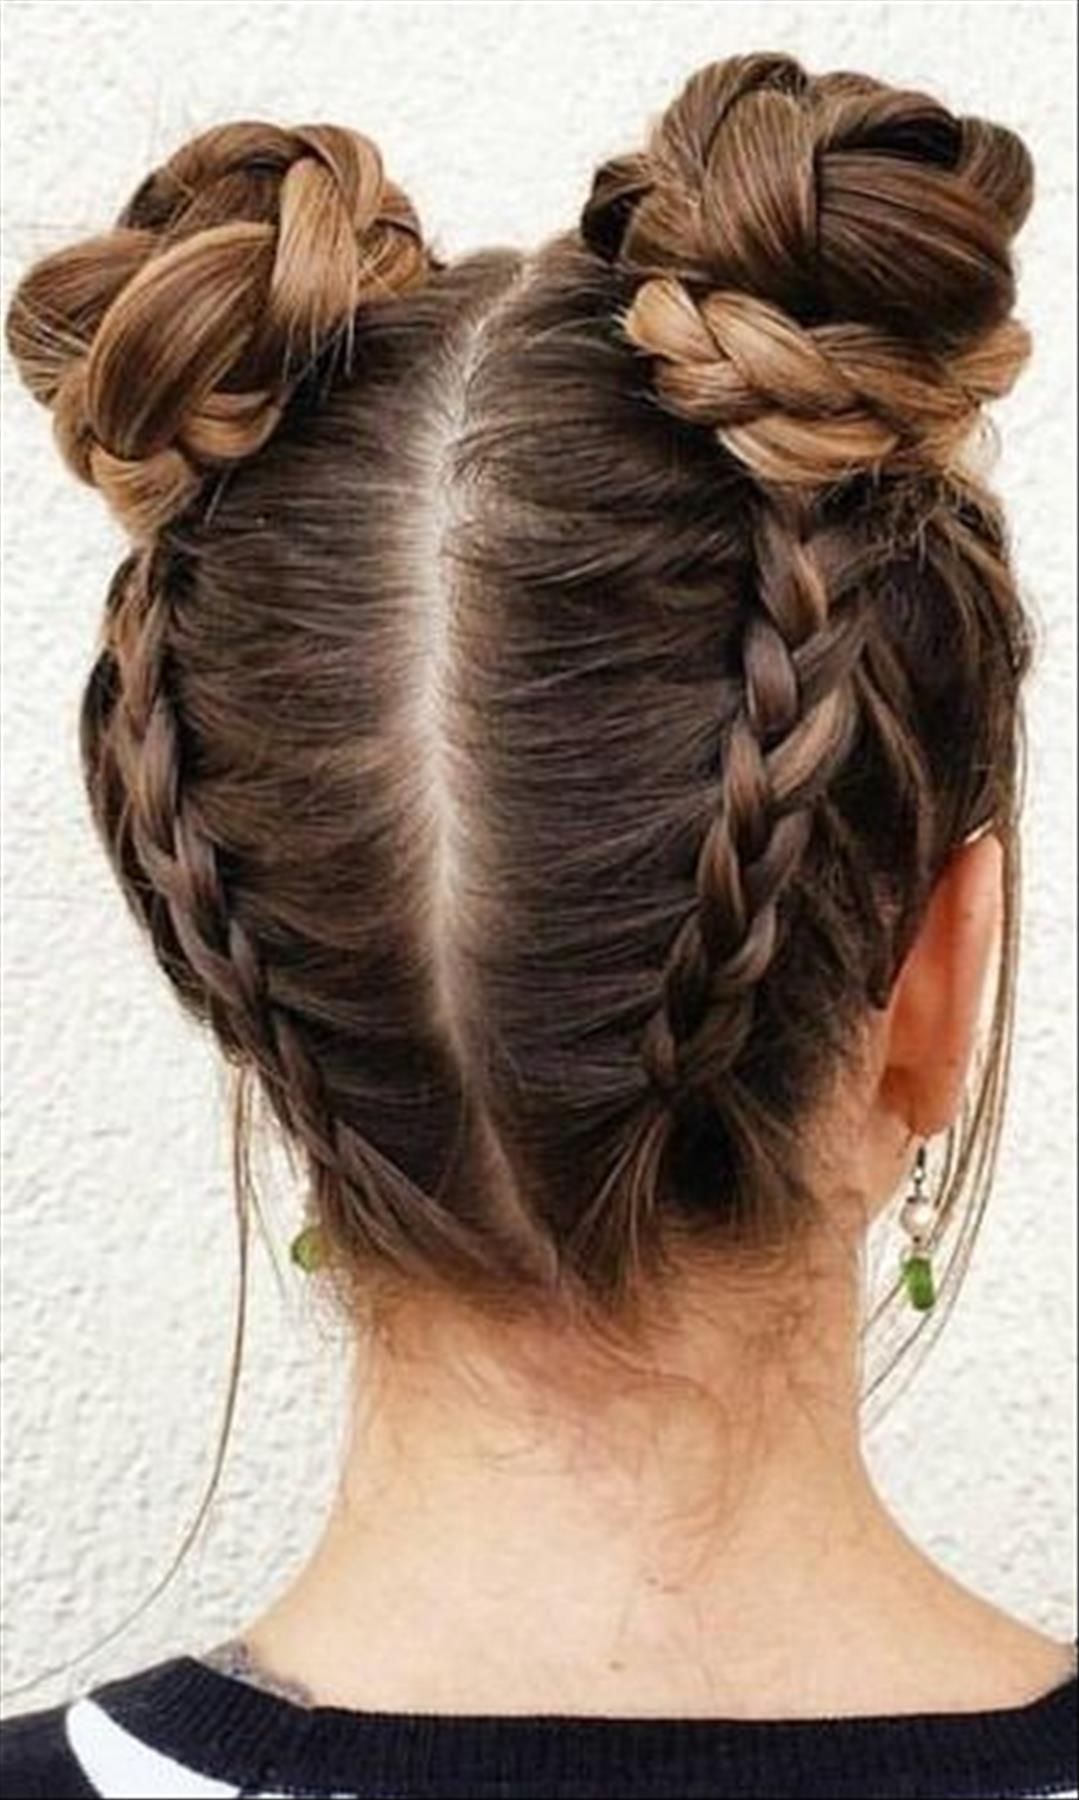 Cute graduation hairstyle designs with buns, braids, updos, ponytails